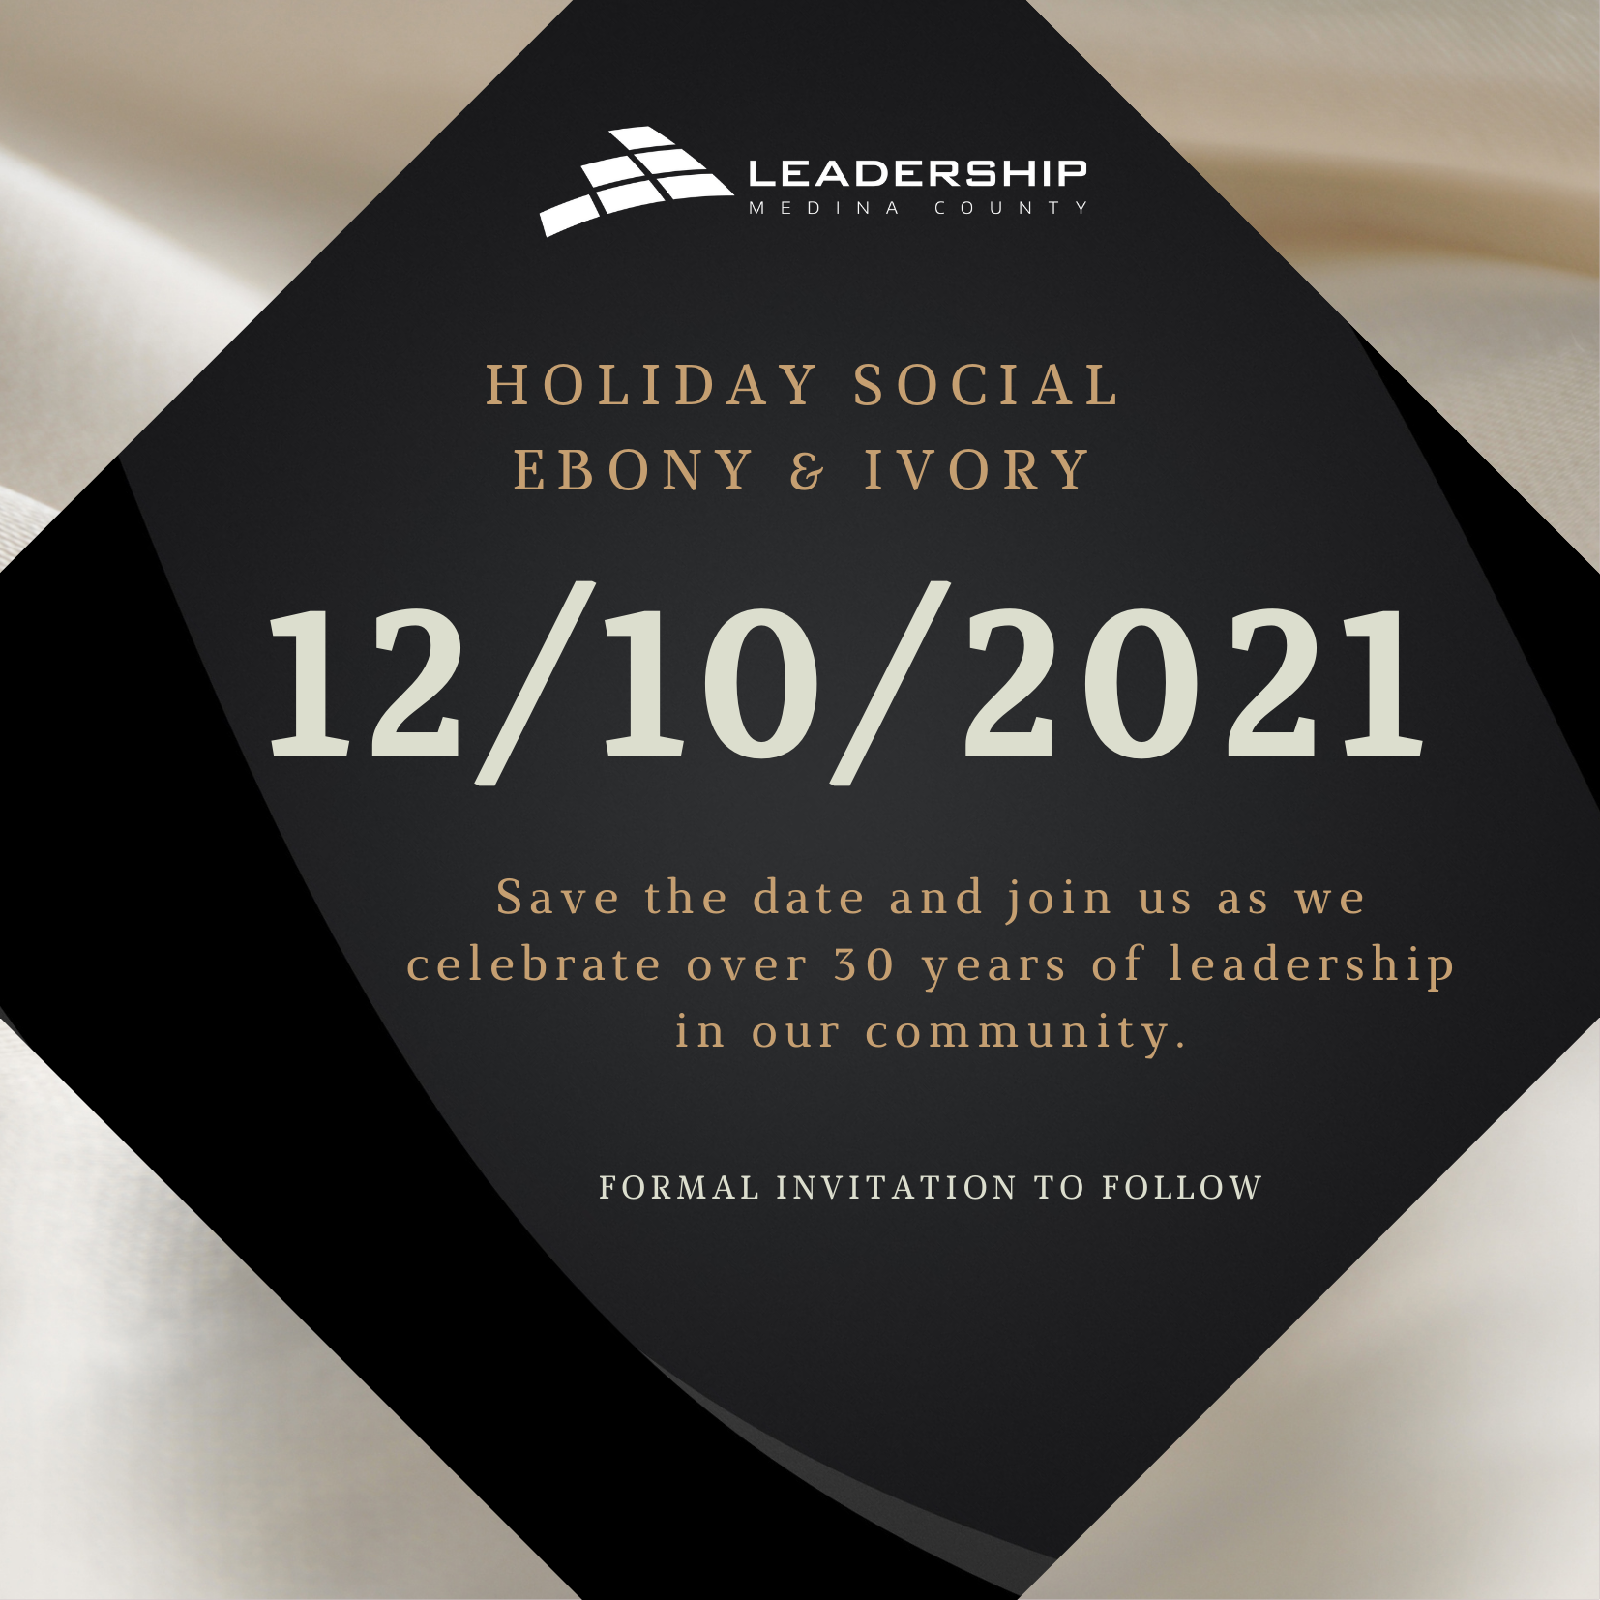 ebony%20and%20ivory%20holiday%20social%20Save%20the%20Date%20Invitation.png